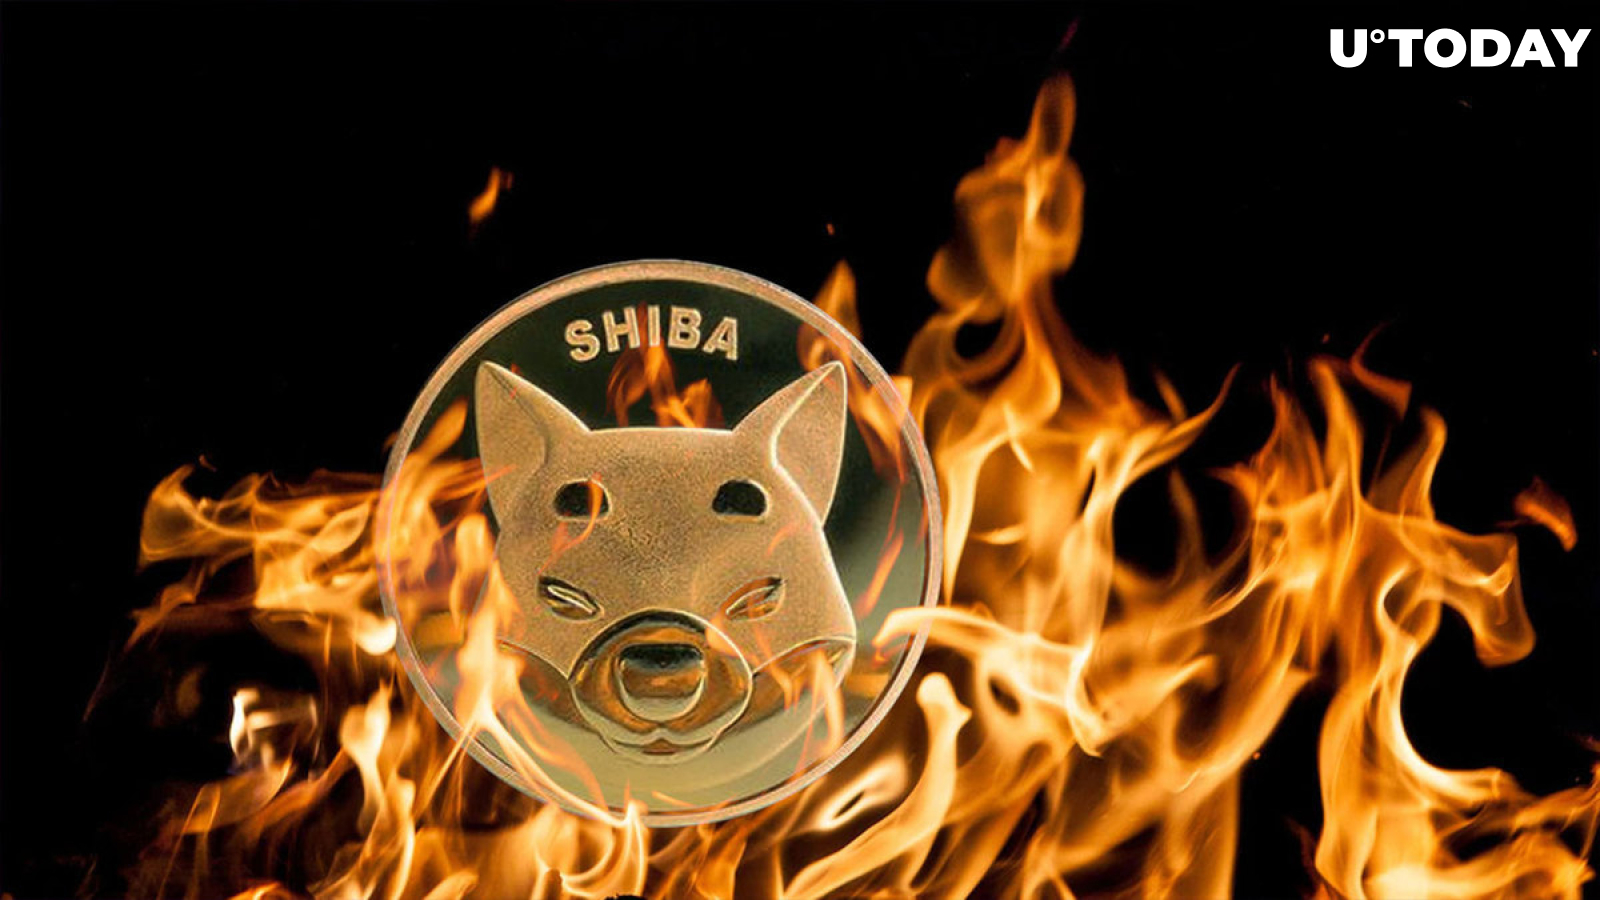 Shiba Inu (SHIB) Burn Rate up 840%, Here's What This Means for Price